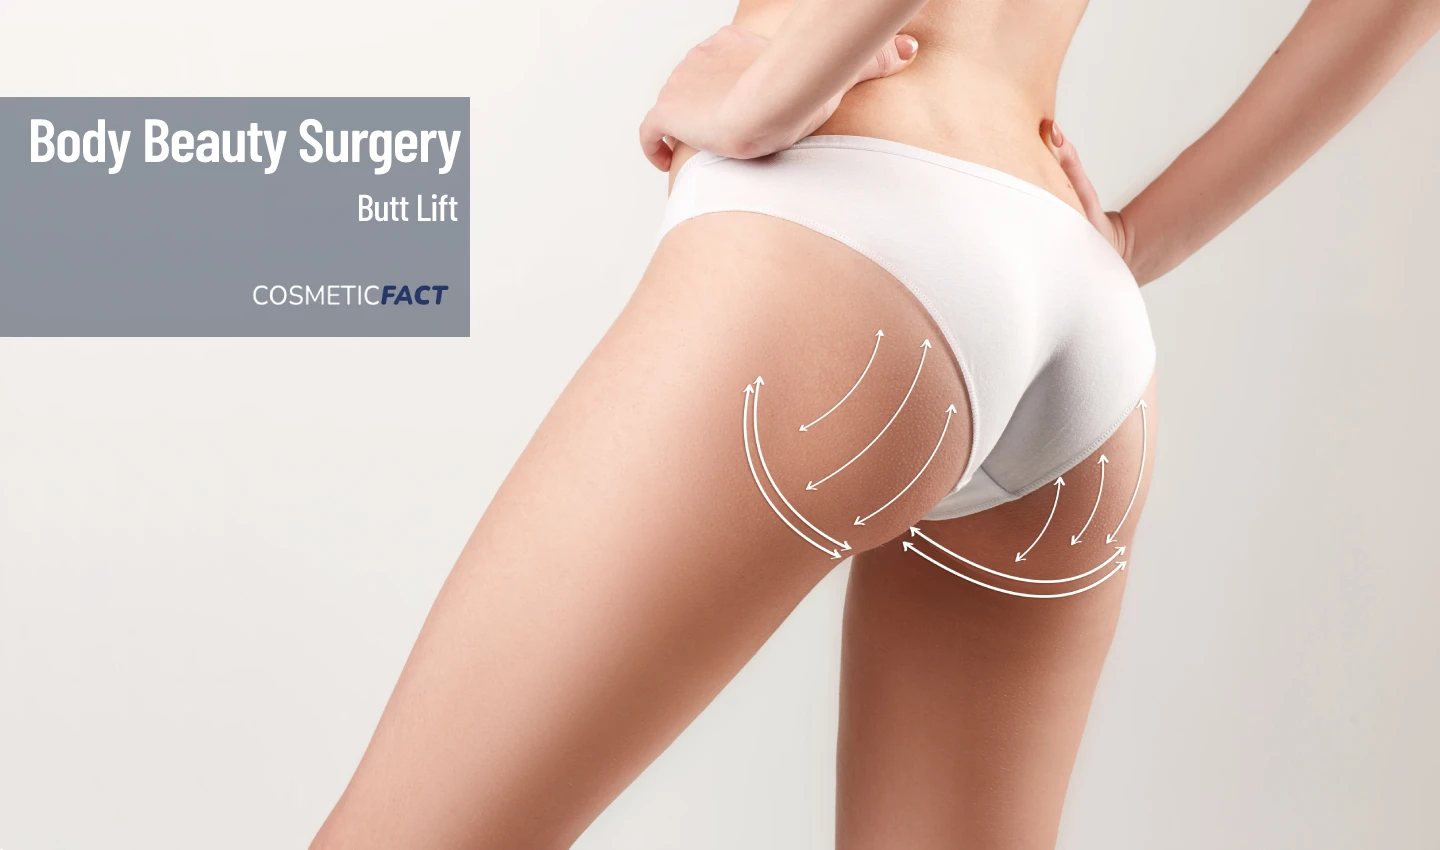 Image of a woman's buttocks with before surgery lines showing the places that were lifted during a butt lift procedure.